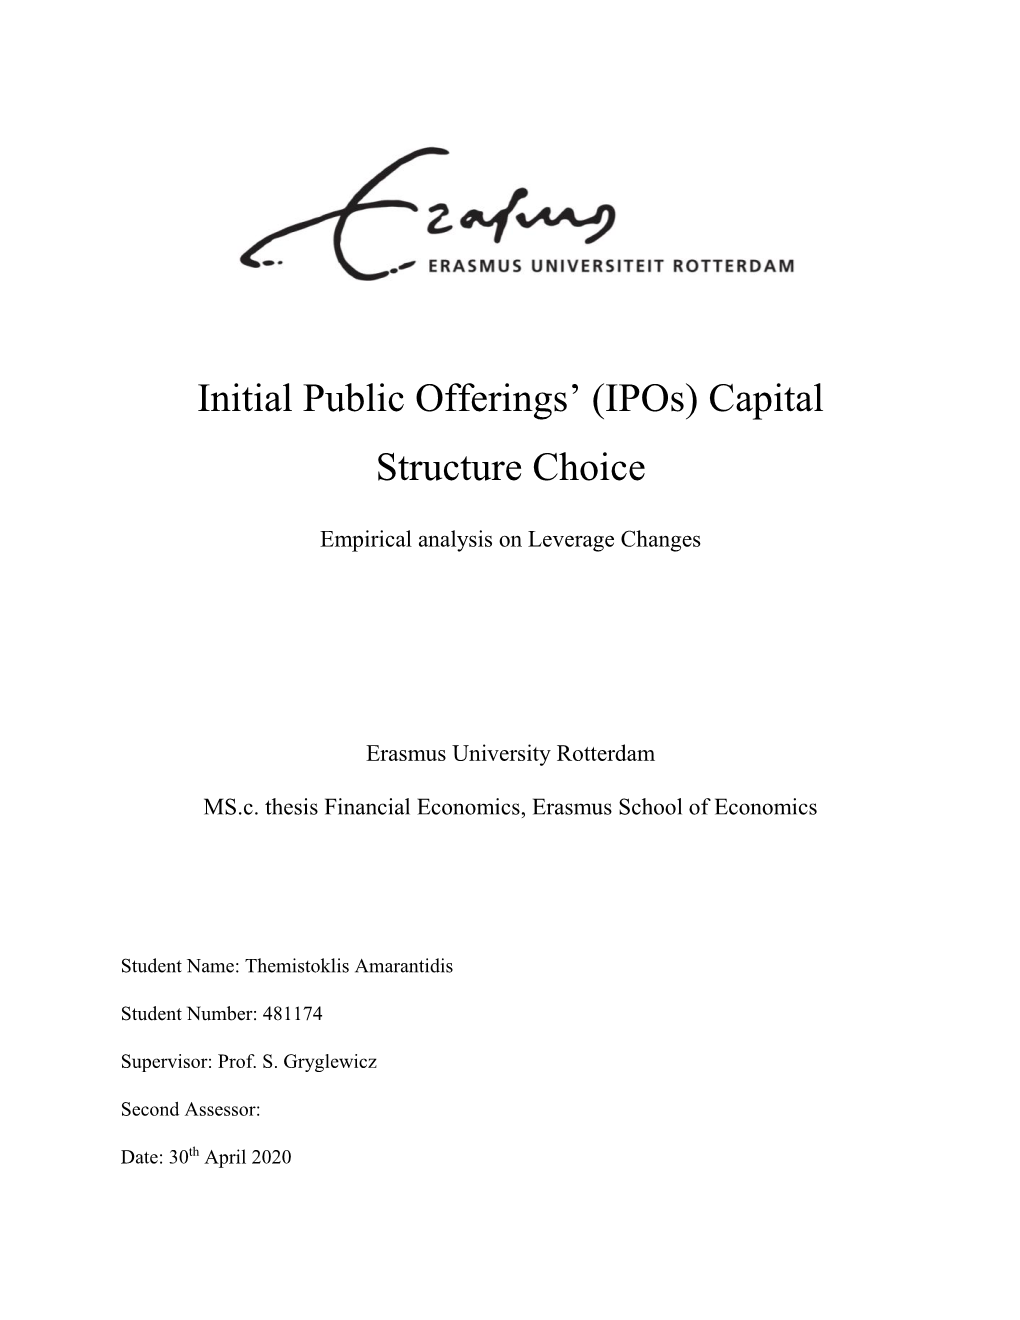 Initial Public Offerings' (Ipos) Capital Structure Choice